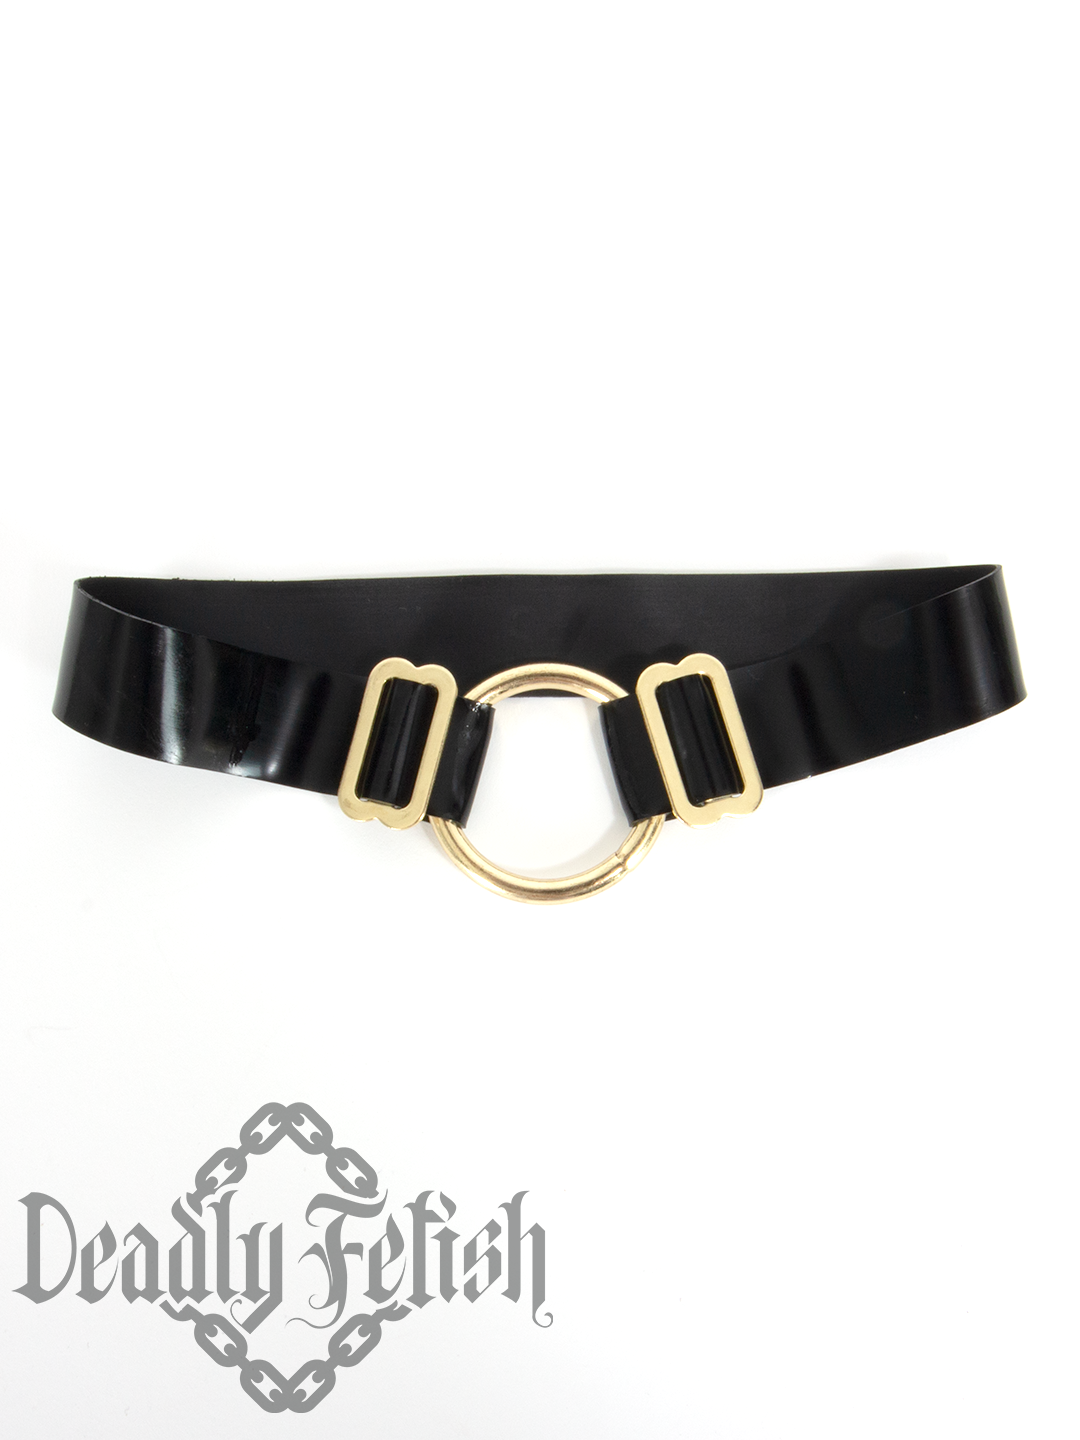 Deadly Fetish Made-to-Order Latex: Multi-Use Straps